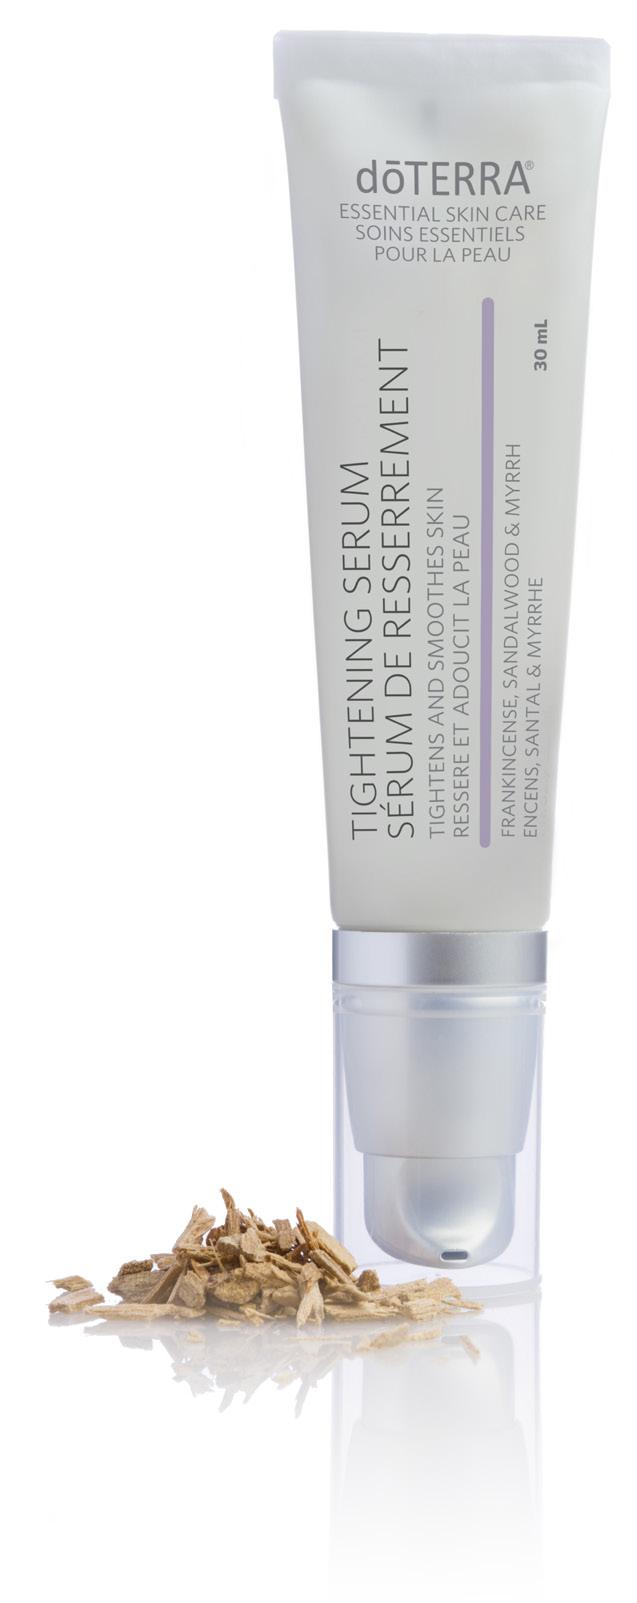 Naturally sourced extracts and gums combine with powerful ingredients for firmer, youngerlooking skin.